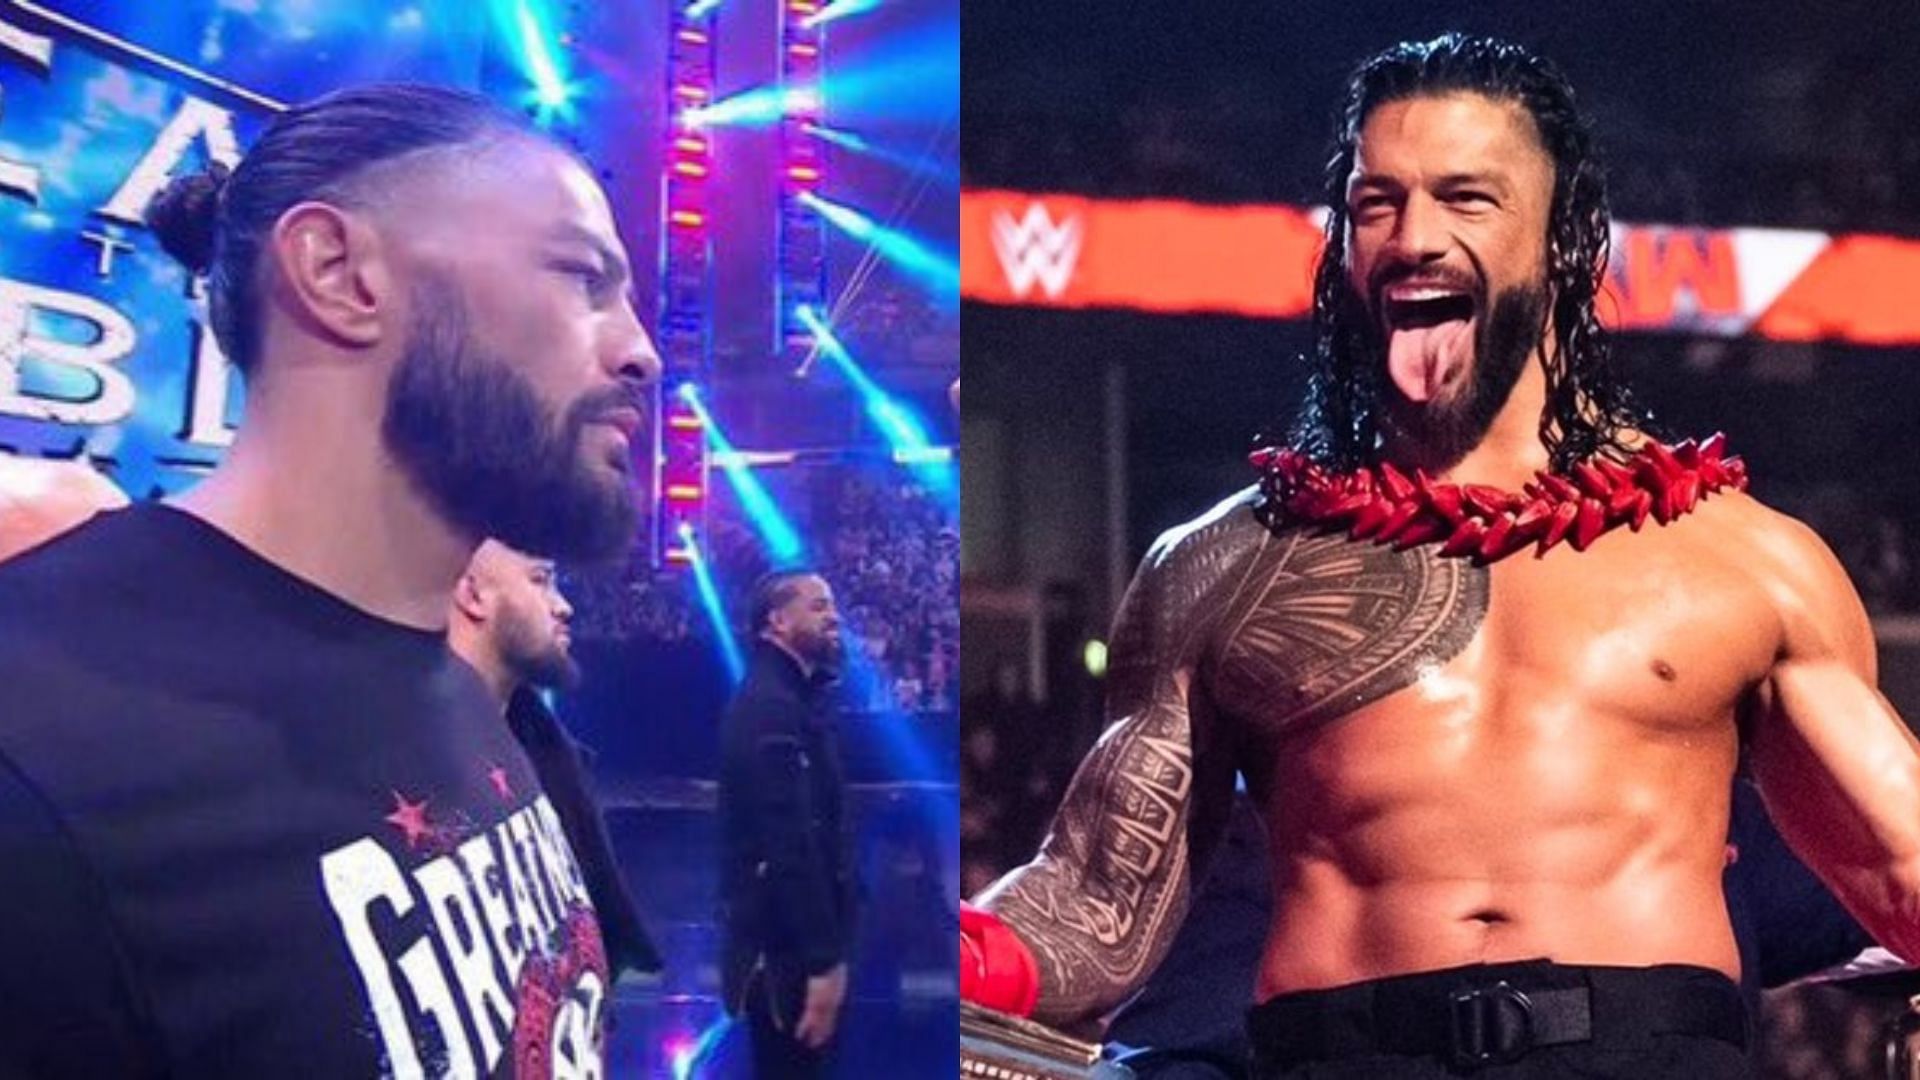 Roman Reigns and The Bloodline confronted two top WWE stars